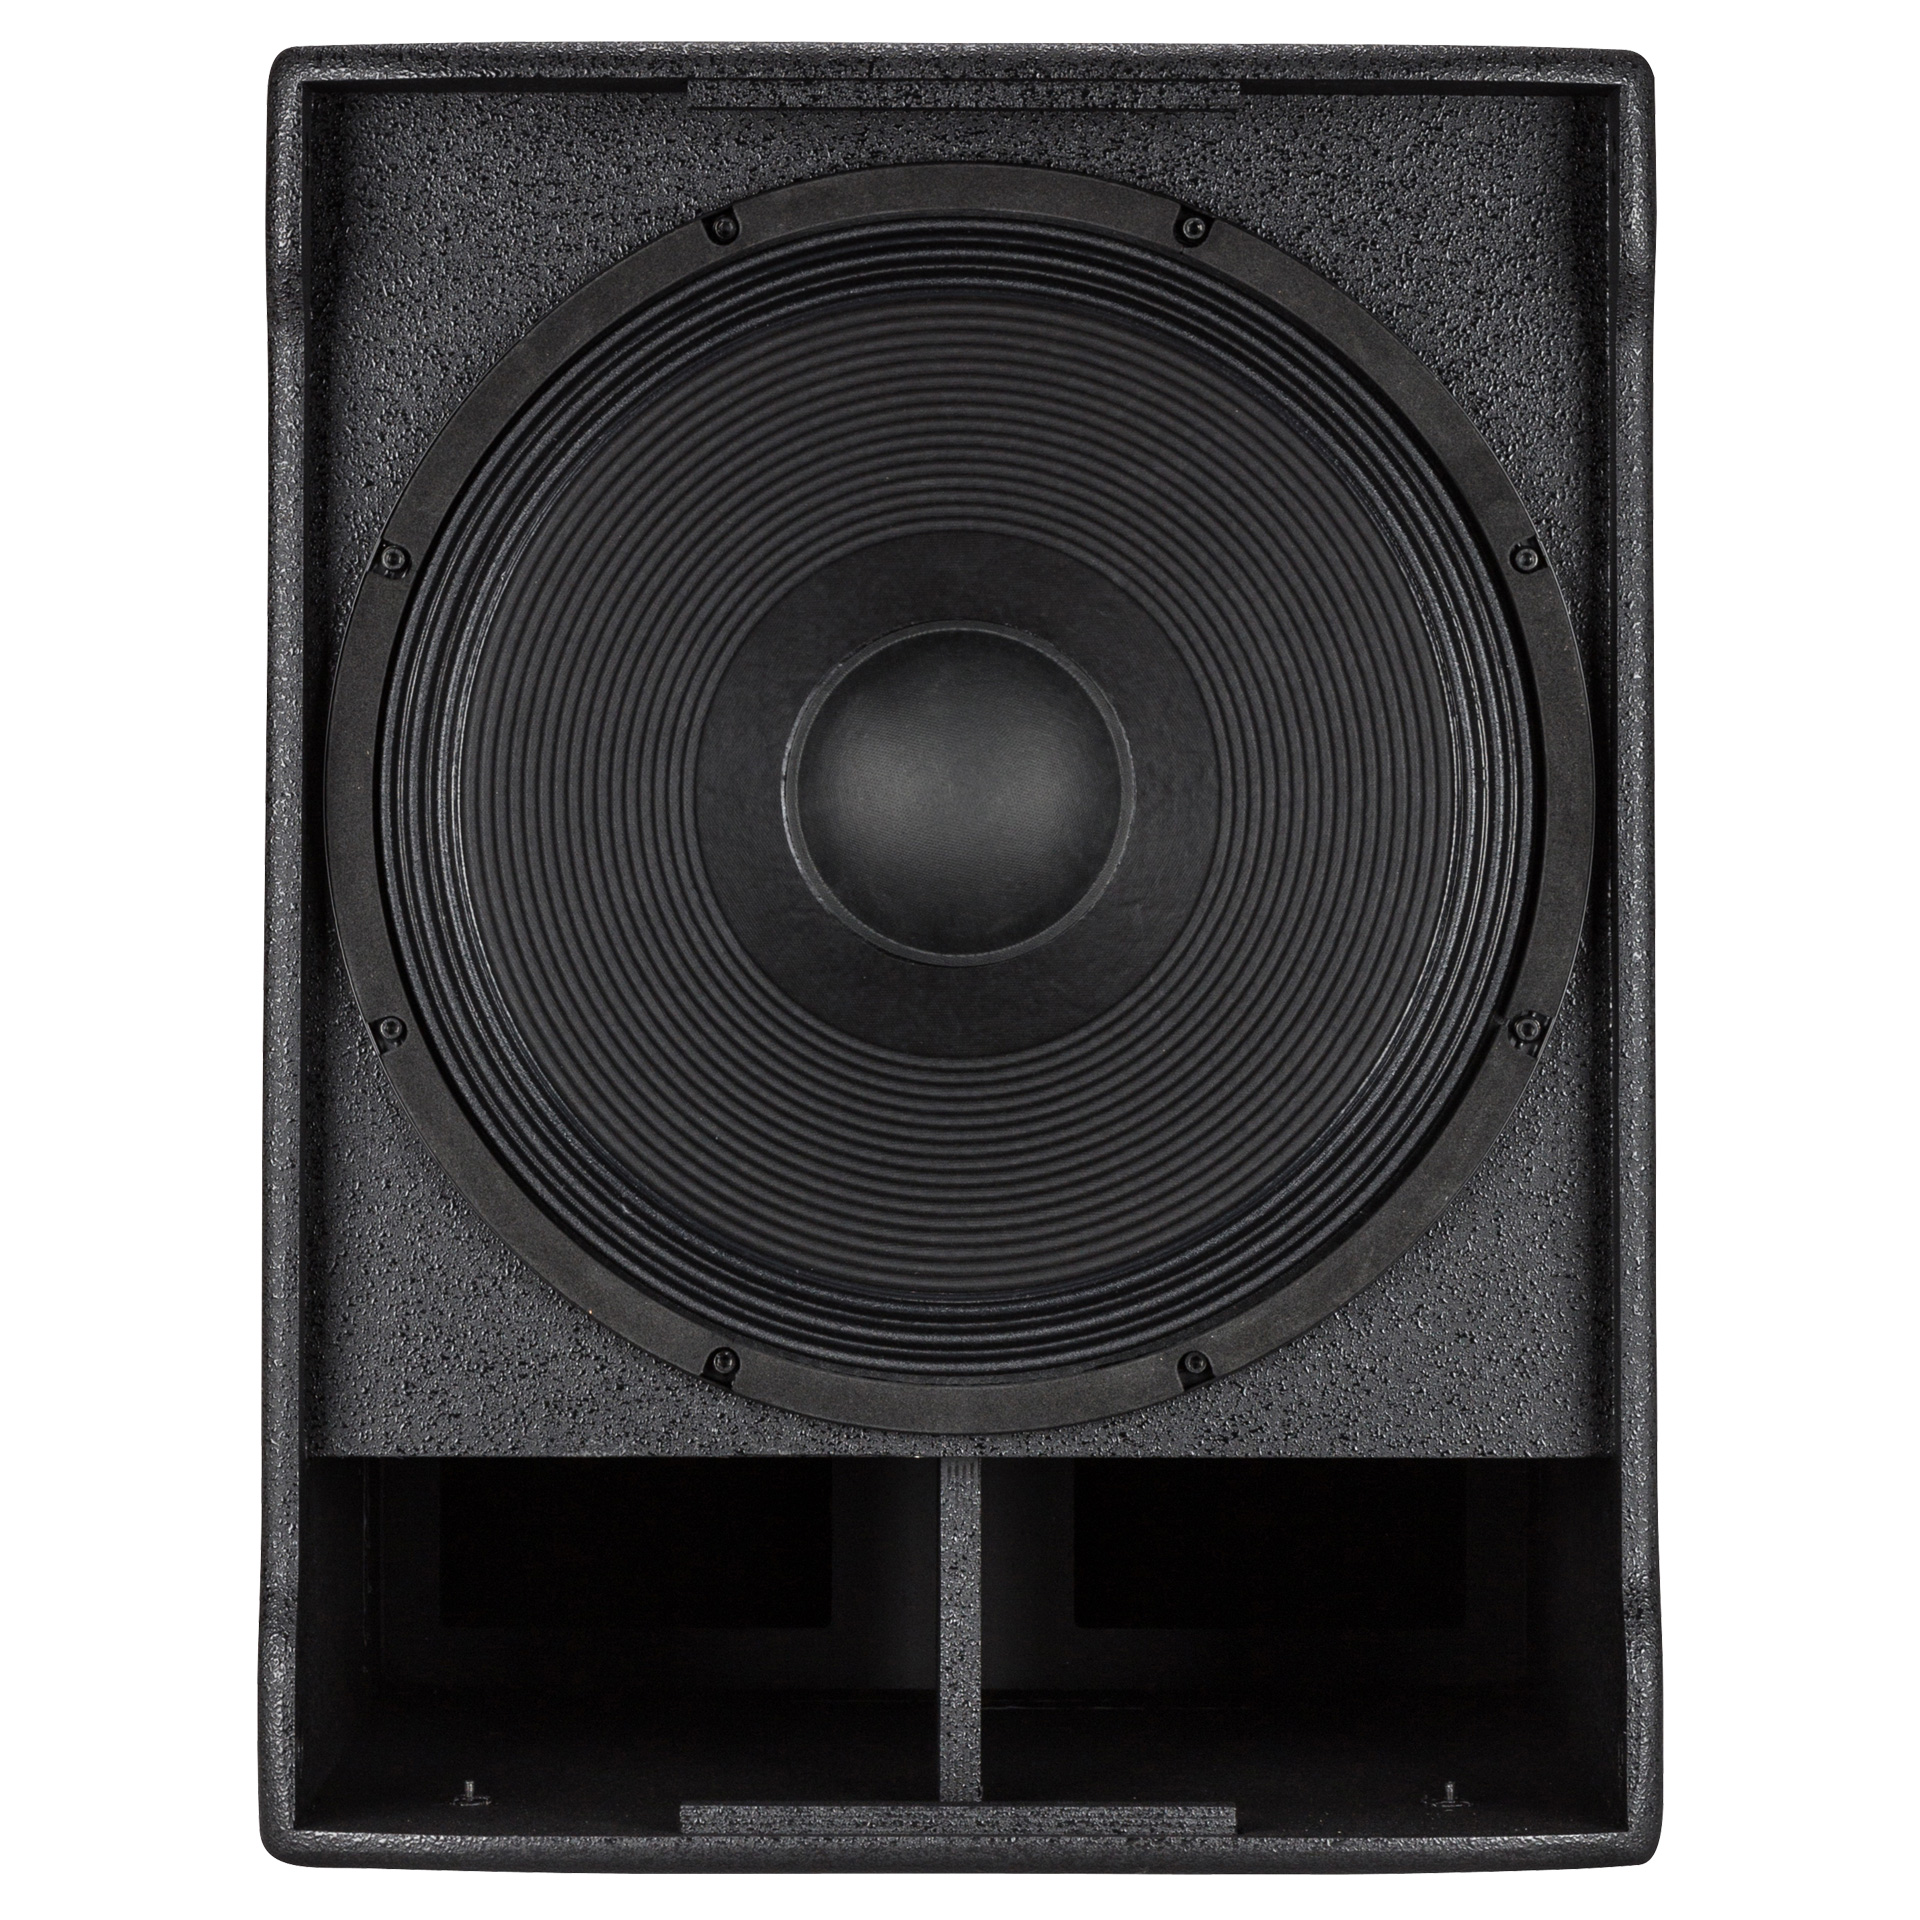 Rcf Sub 708-as Ii - Actieve subwoofer - Variation 3